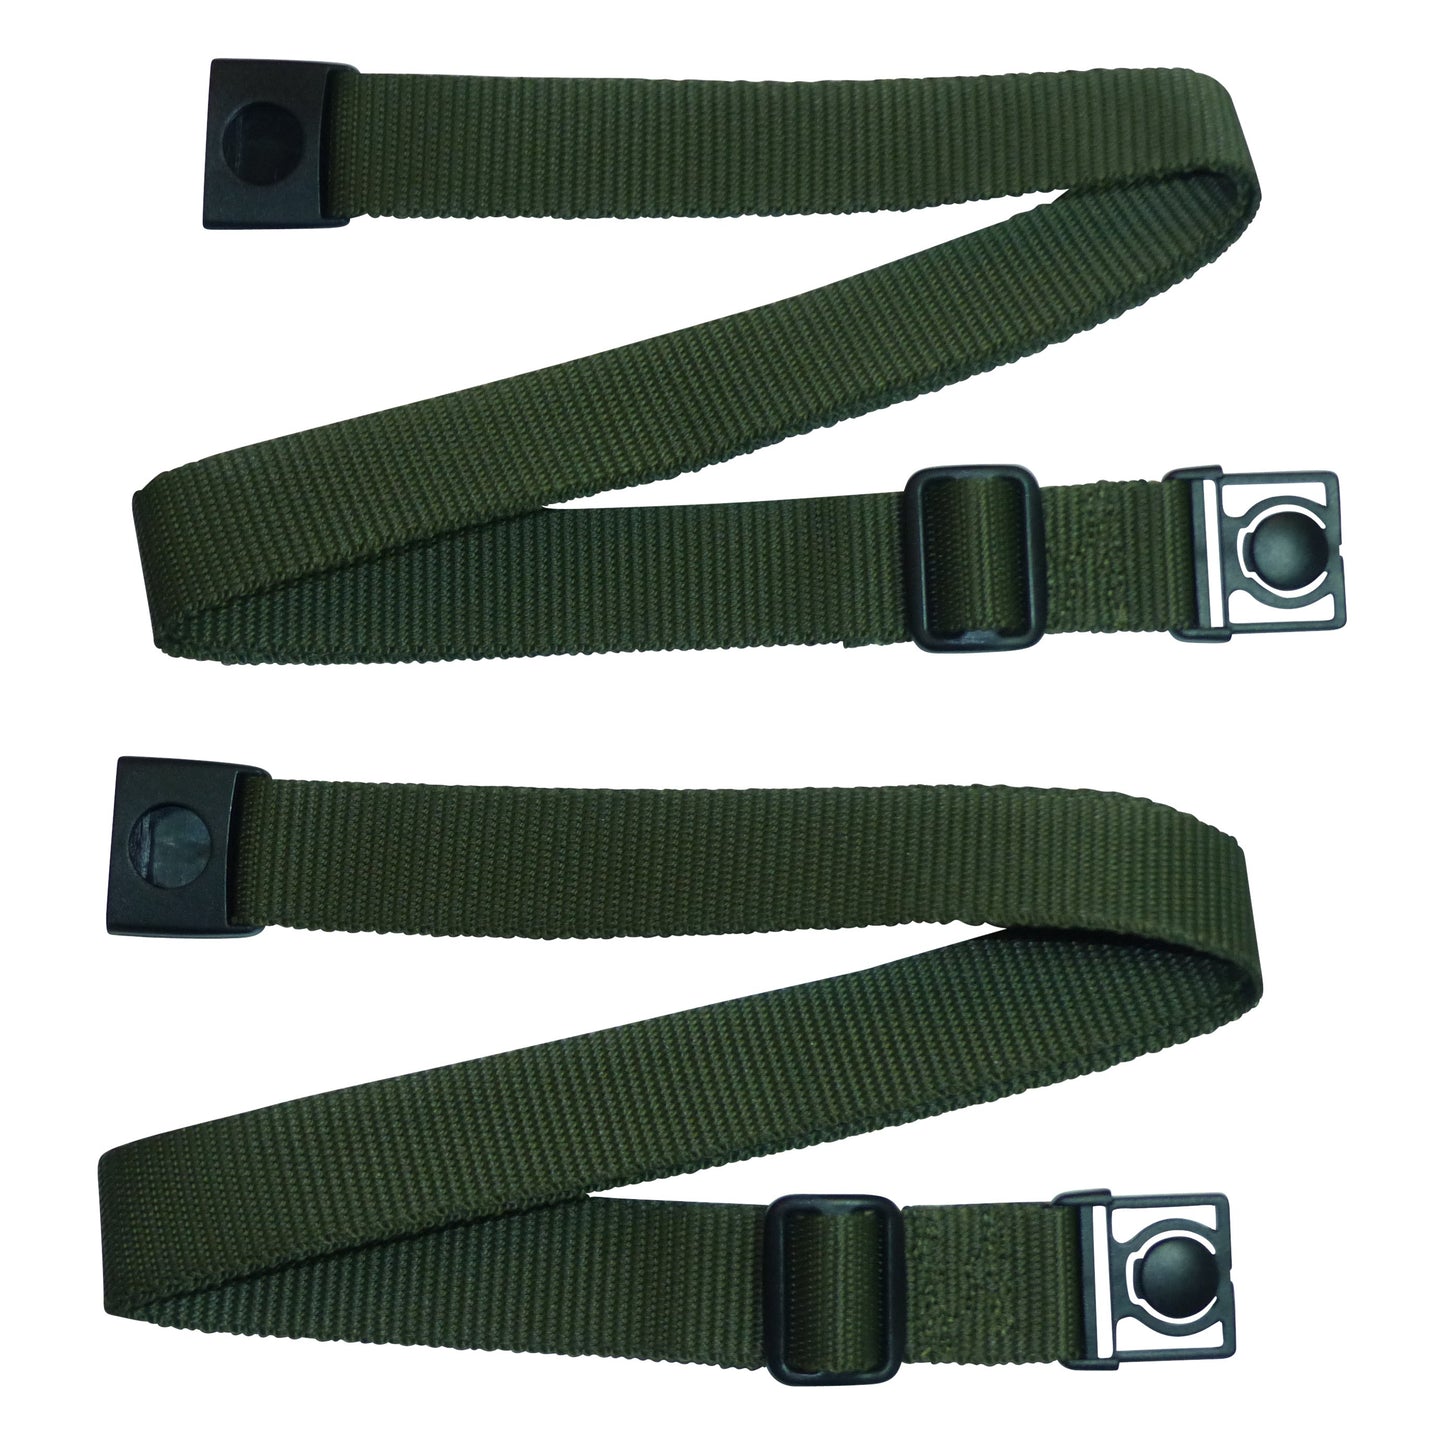 Benristraps 25mm Webbing Strap with Button Release and Triglide Slider Buckles (Pair) in Olive Green